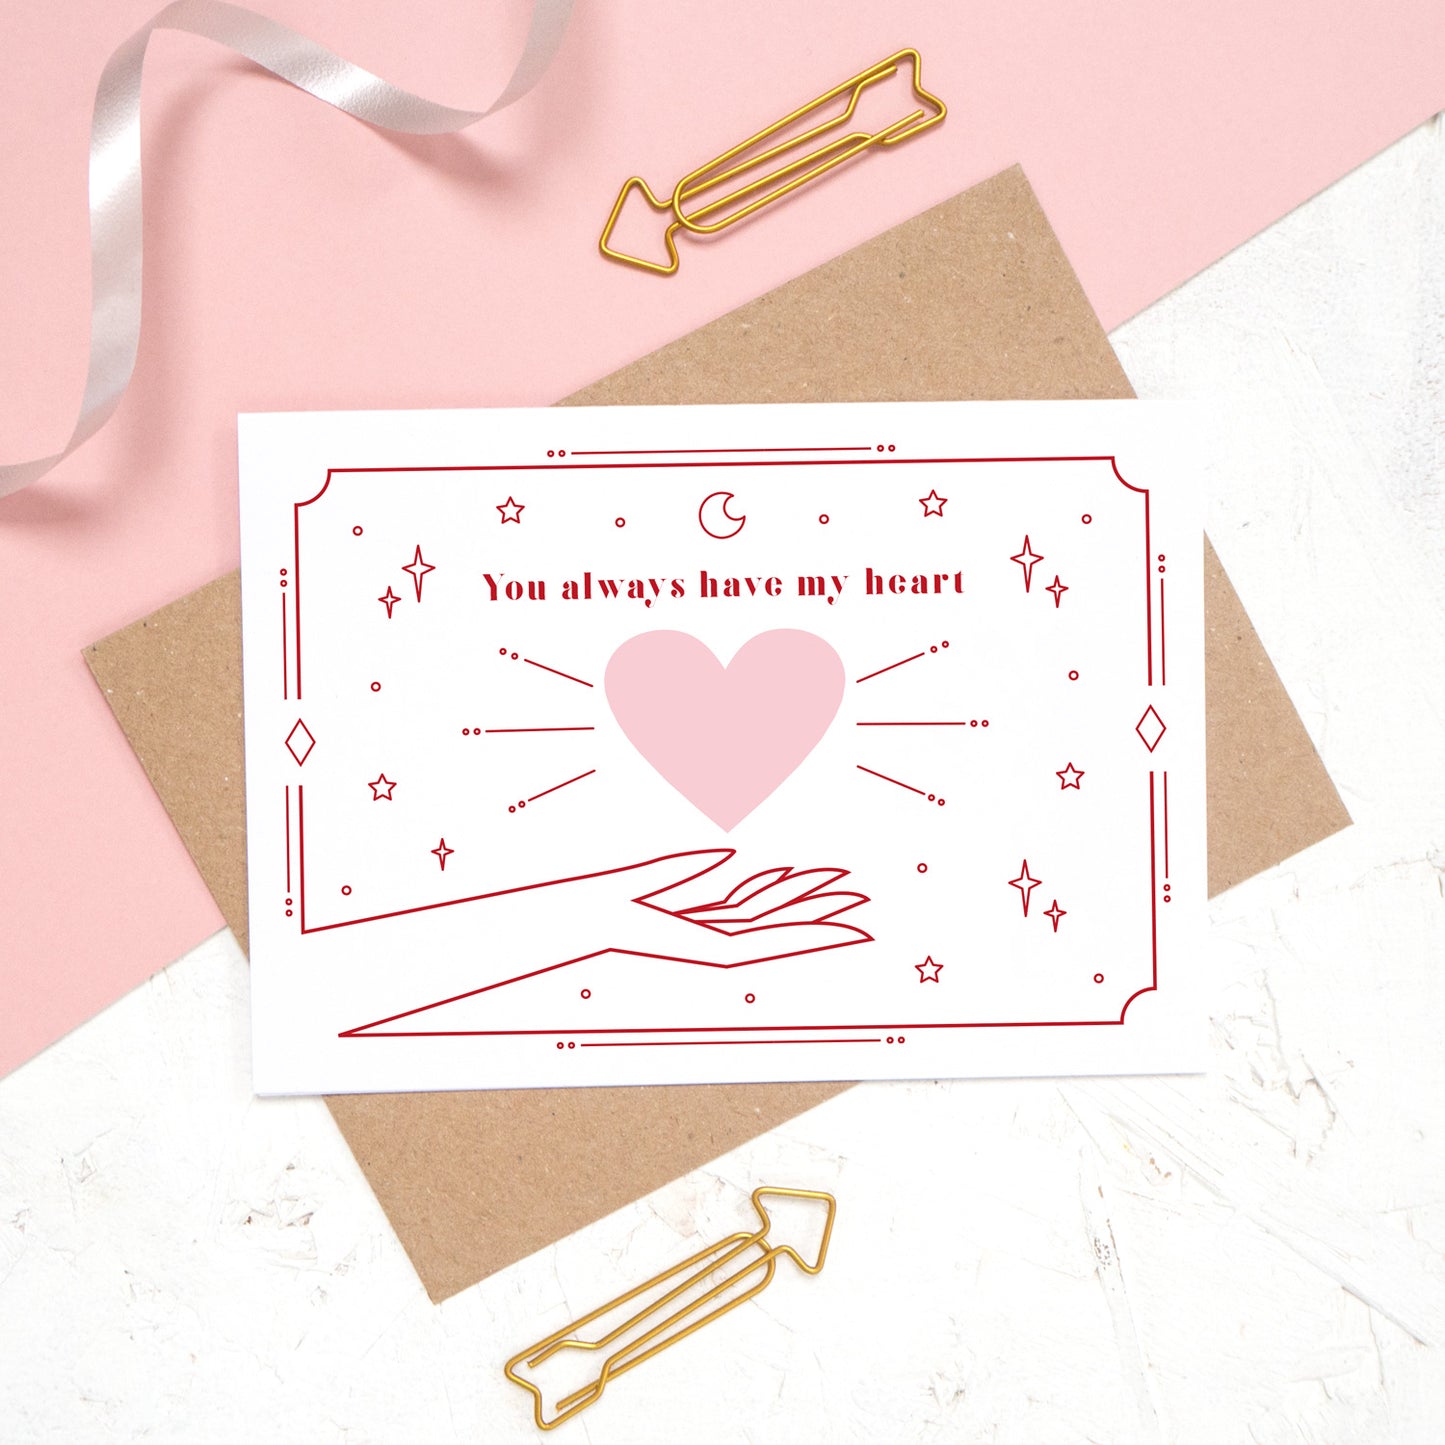 You always have my heart love and romance card designed by Joanne Hawker. This card features the phrase 'you always have my heart' with a heart and cosmic decor.